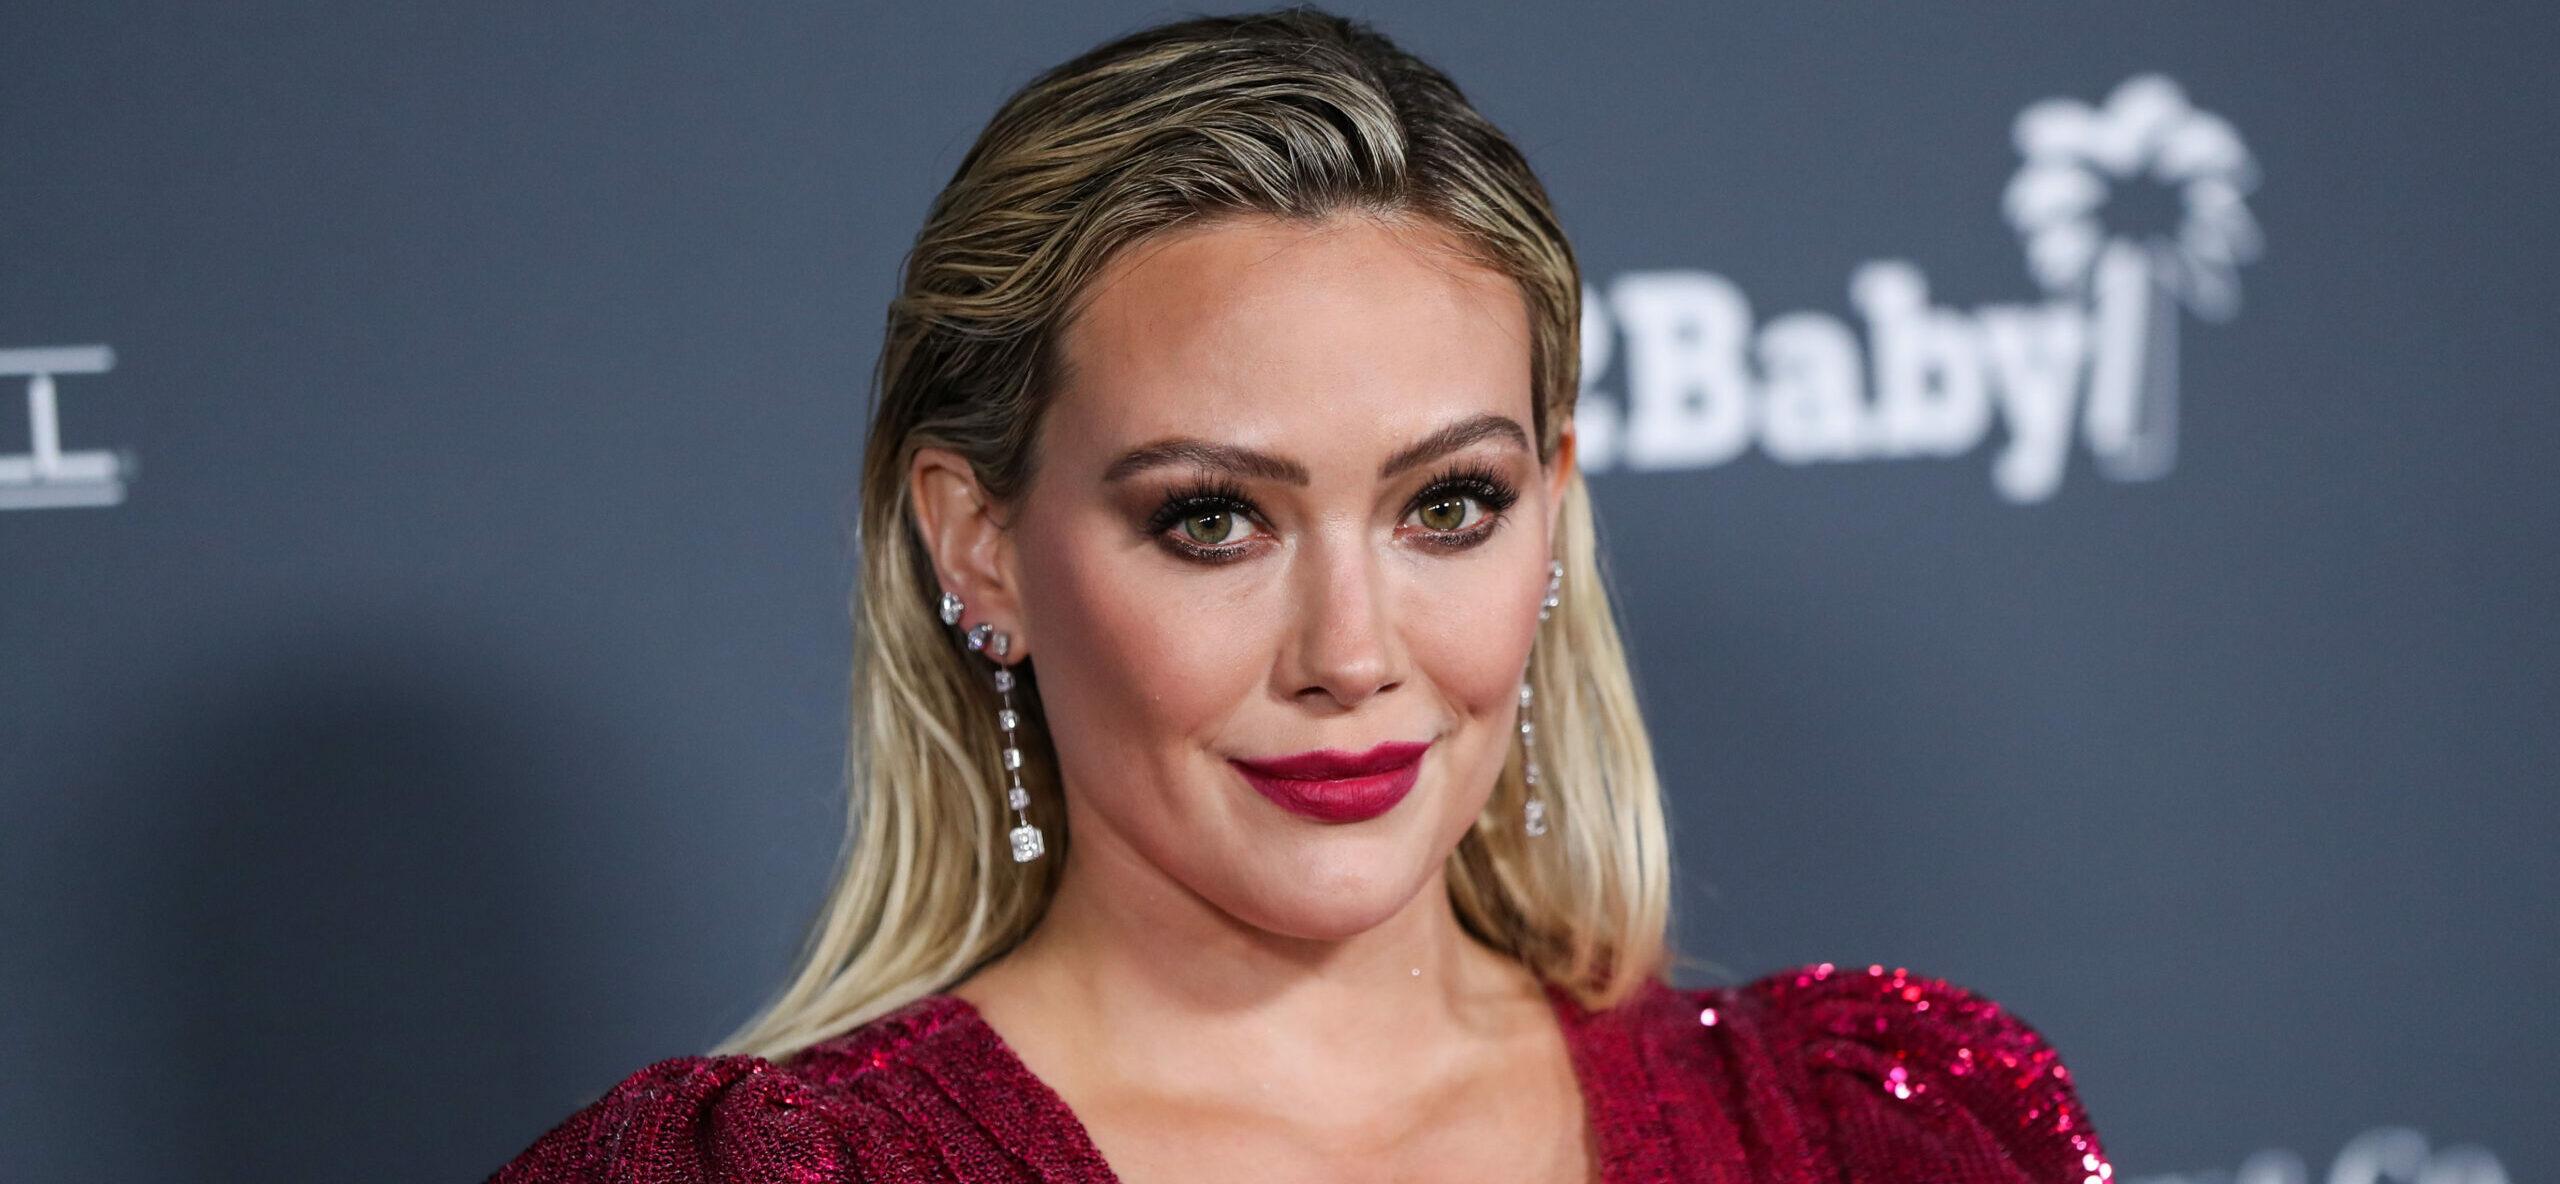 Hilary Duff Admits To Struggling With Body Image During Teenage Years